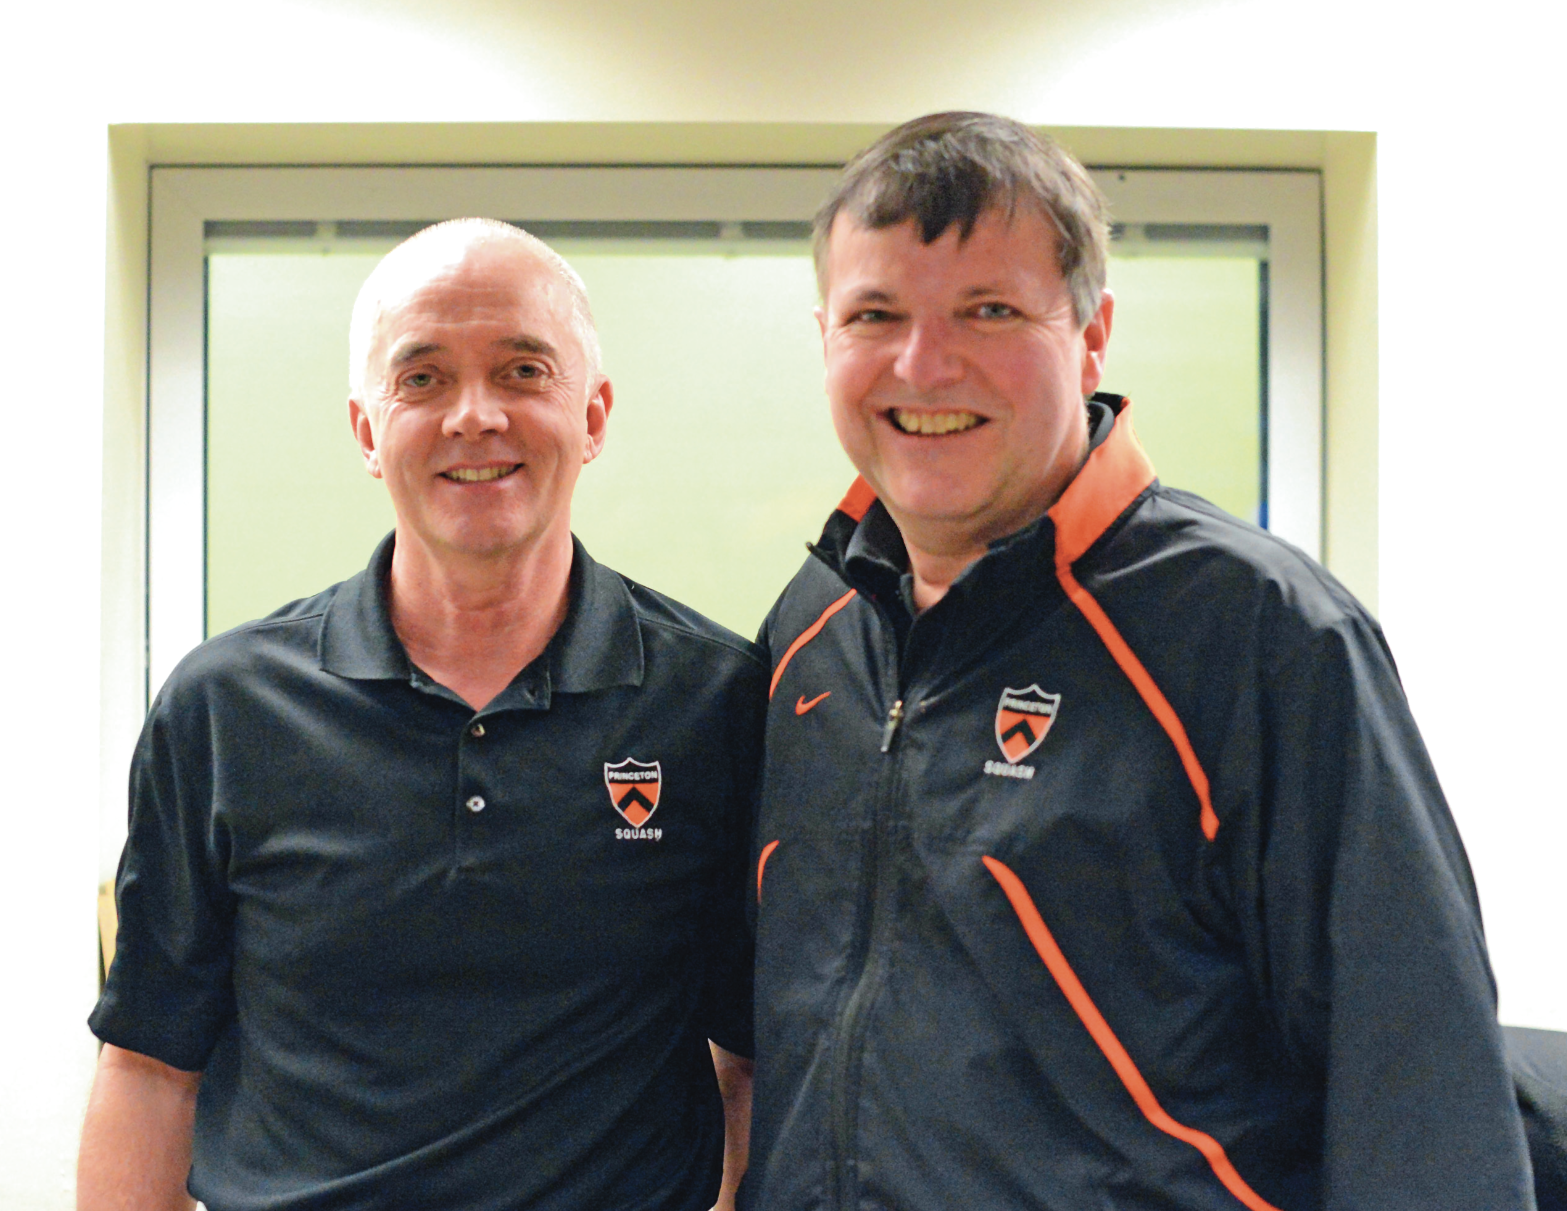 One of the great, unsung heroes of the Princeton squash program has been Neil Pomphrey (Above, L). Since 1992 the Scottish scientist has served as the assistant coach.